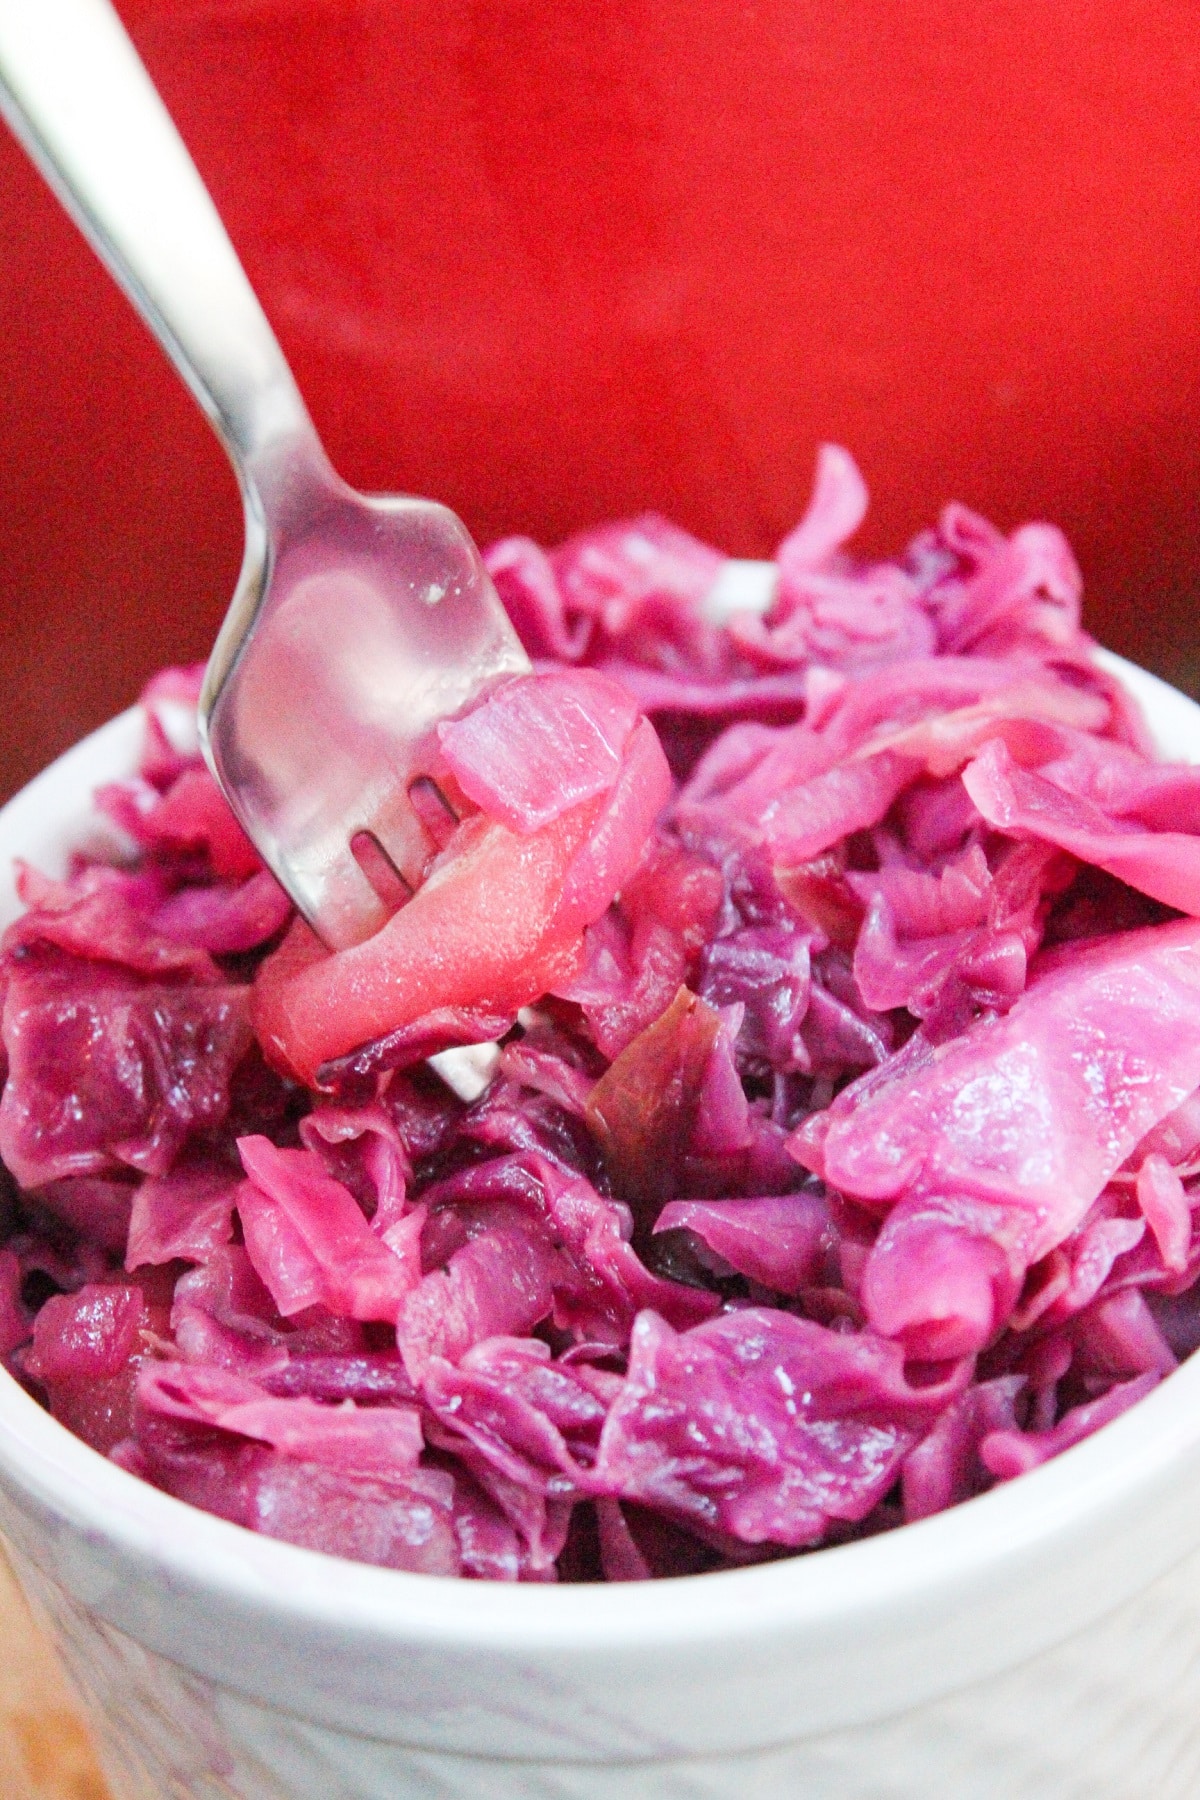 chopped red cabbage and apples in a small white dish with a fork.